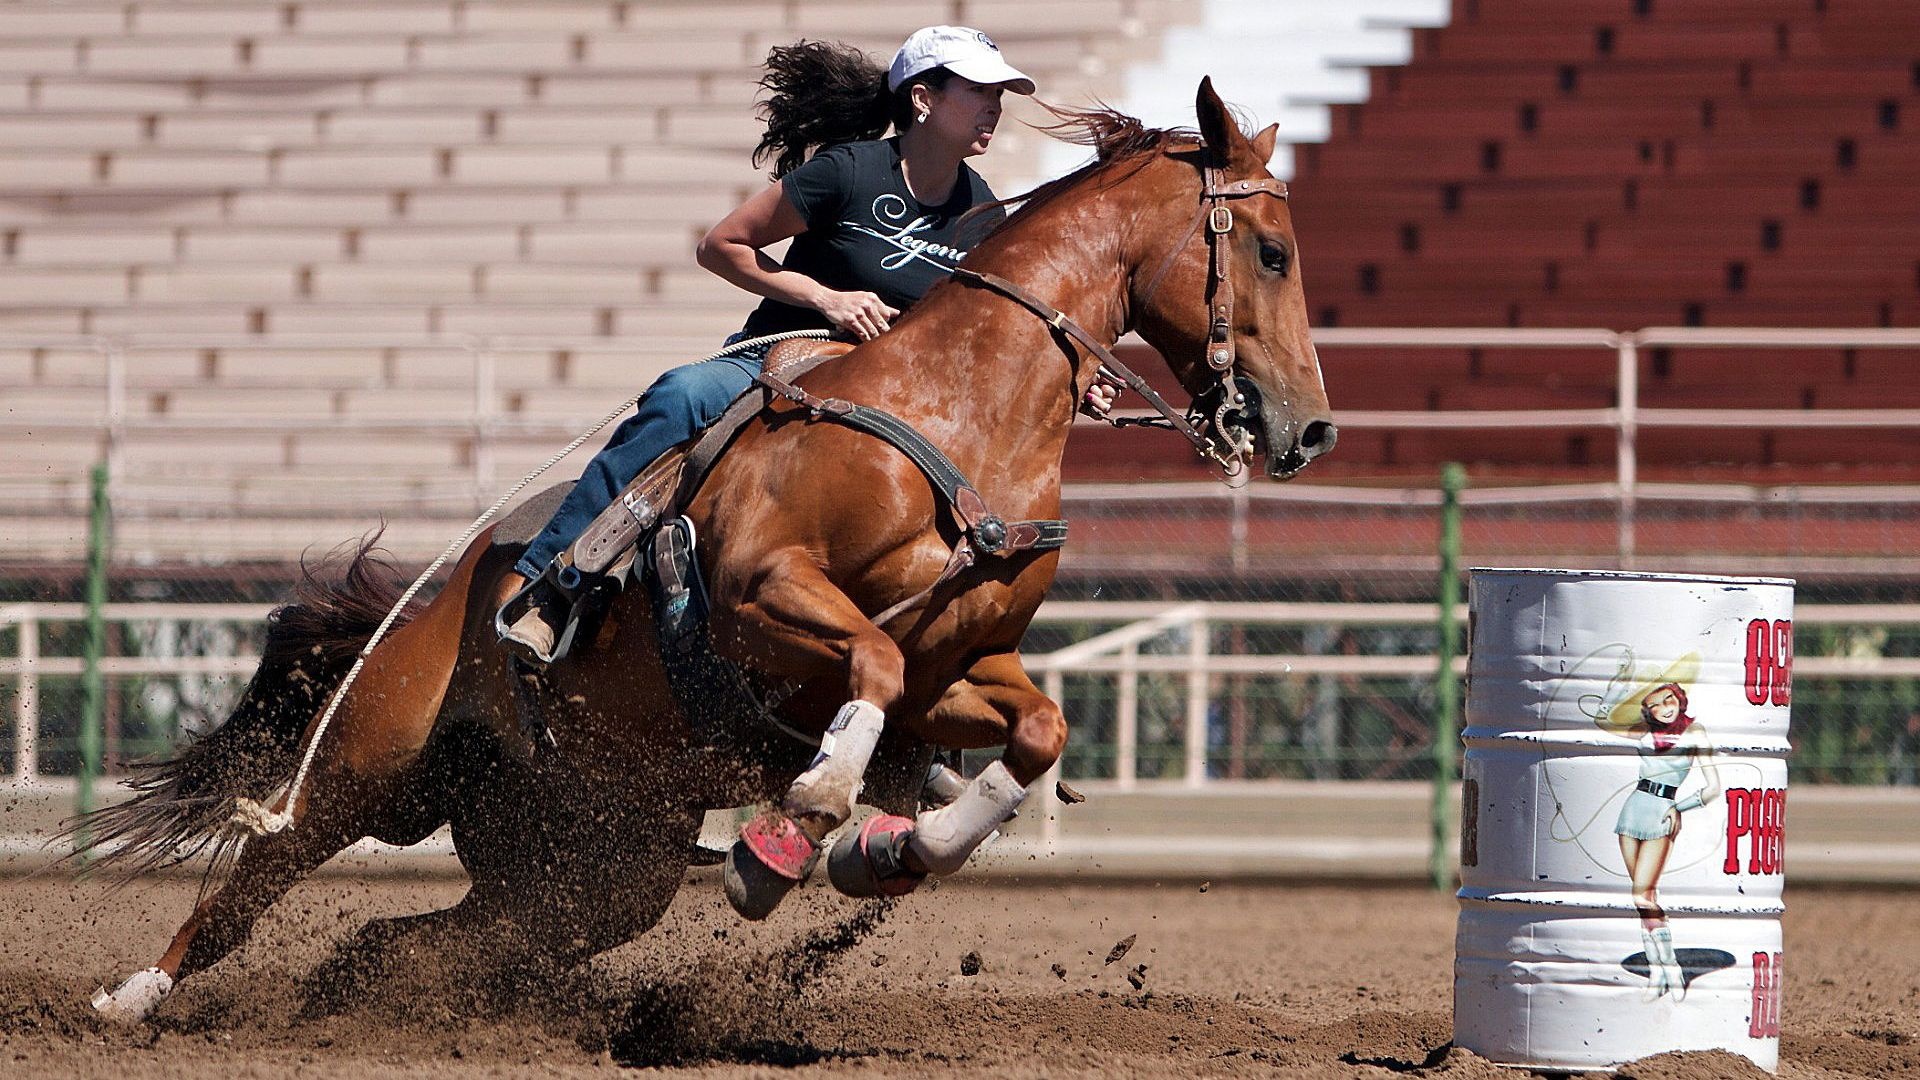 Equestrian Sports: Reining, A western riding competition for horses, A classic American horse-riding activity. 1920x1080 Full HD Background.